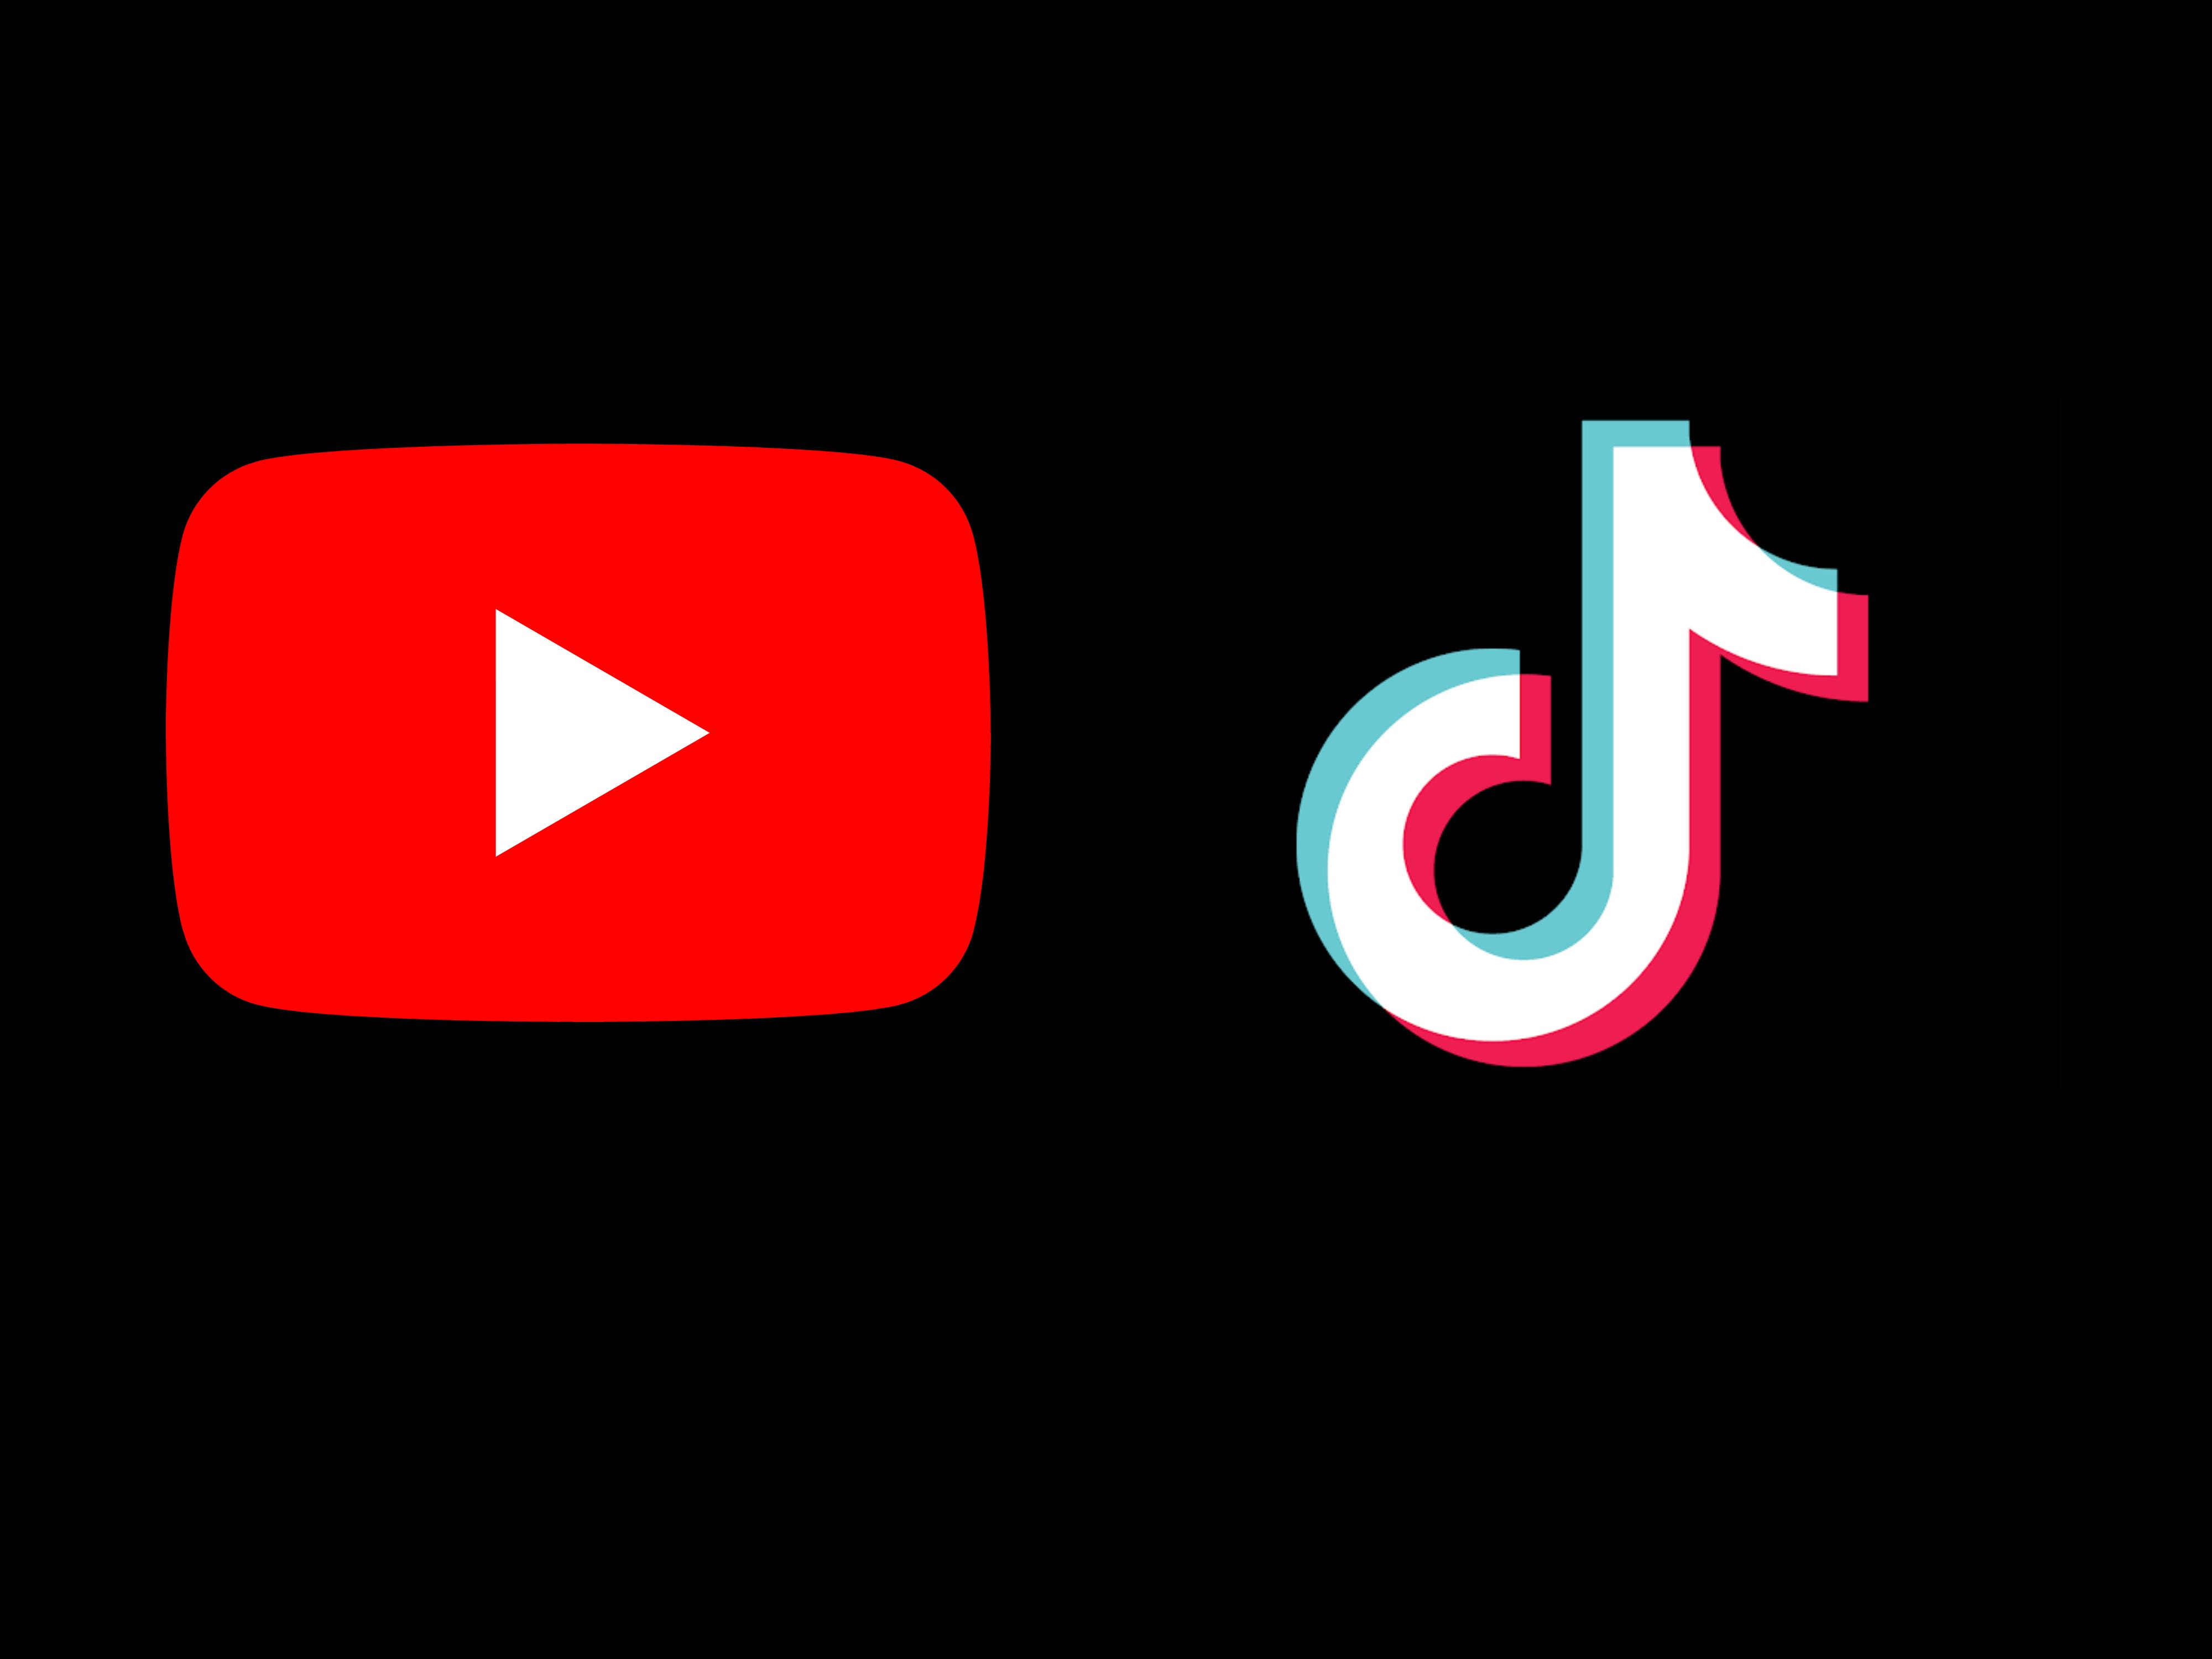 TikTok is testing 60-minute videos, which could be a big threat to YouTube